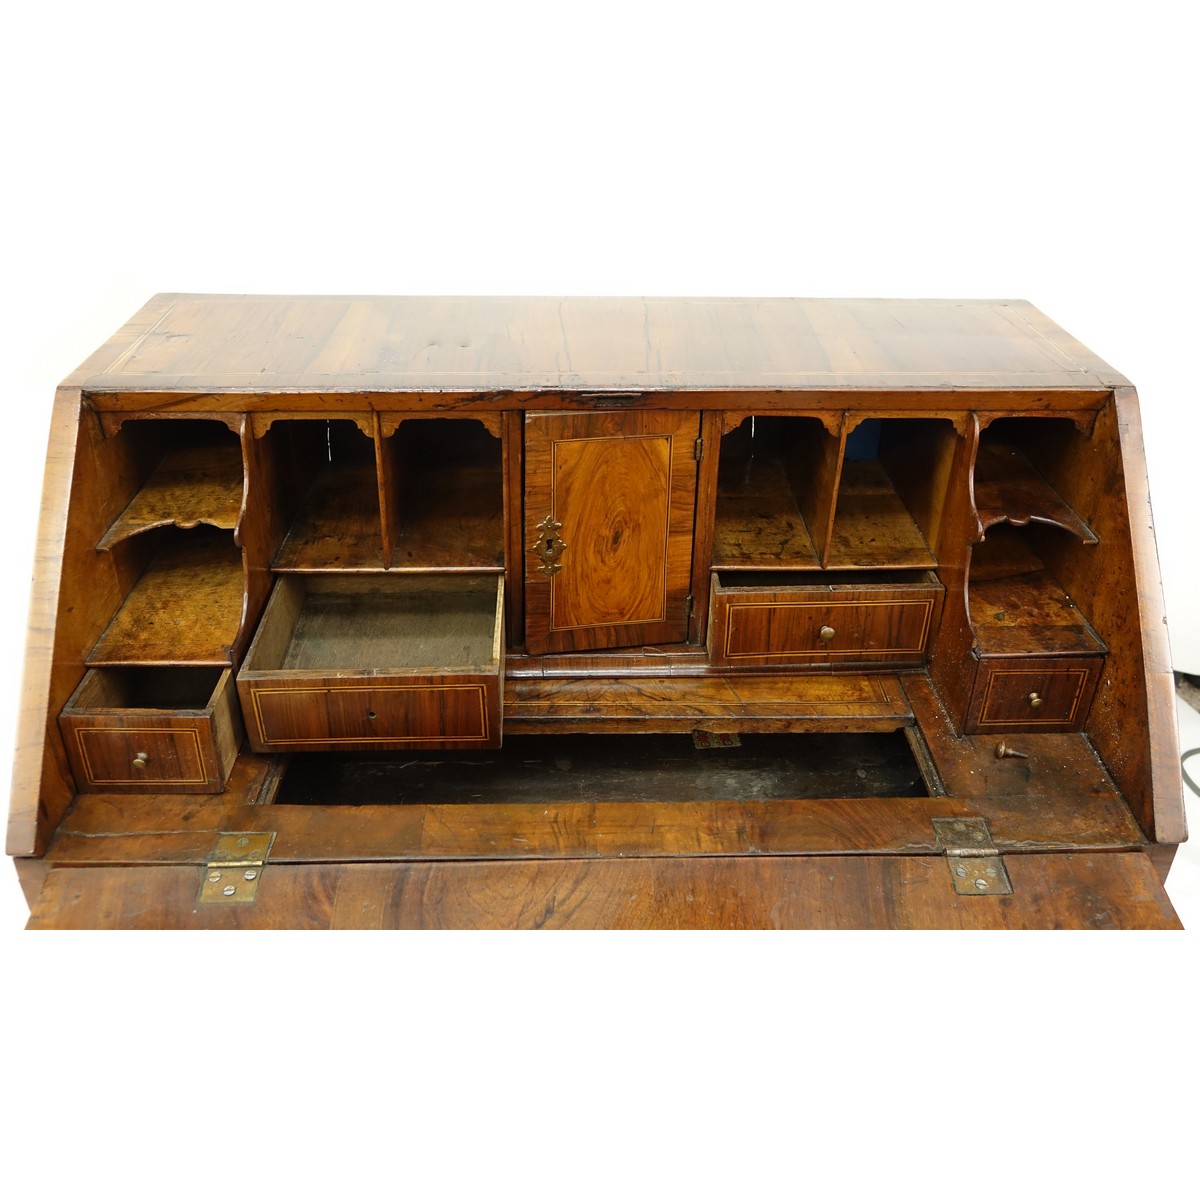 18/19th Century French Inlaid Drop Front Desk with Bronze Pulls. Two sliding drawers and two large drawers, interior compartments.